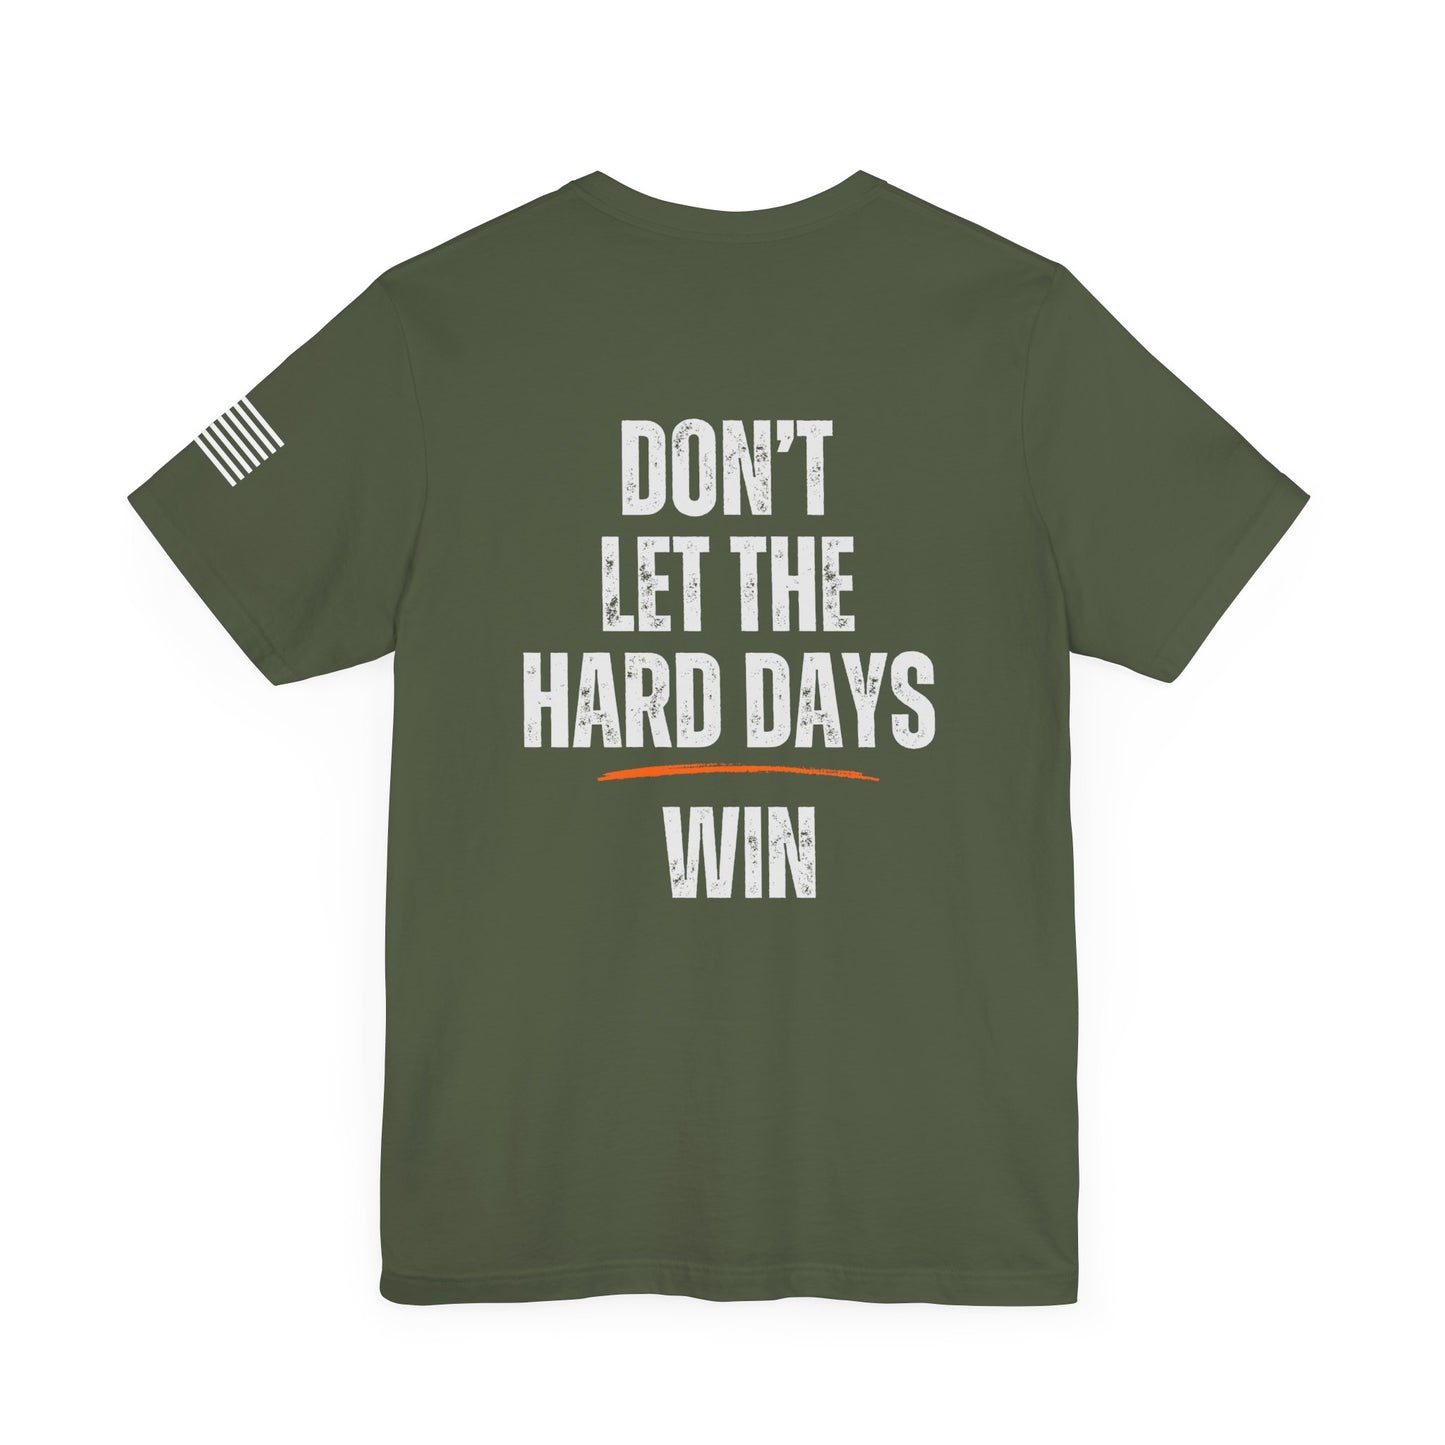 DON'T LET THE HARD DAYS WIN